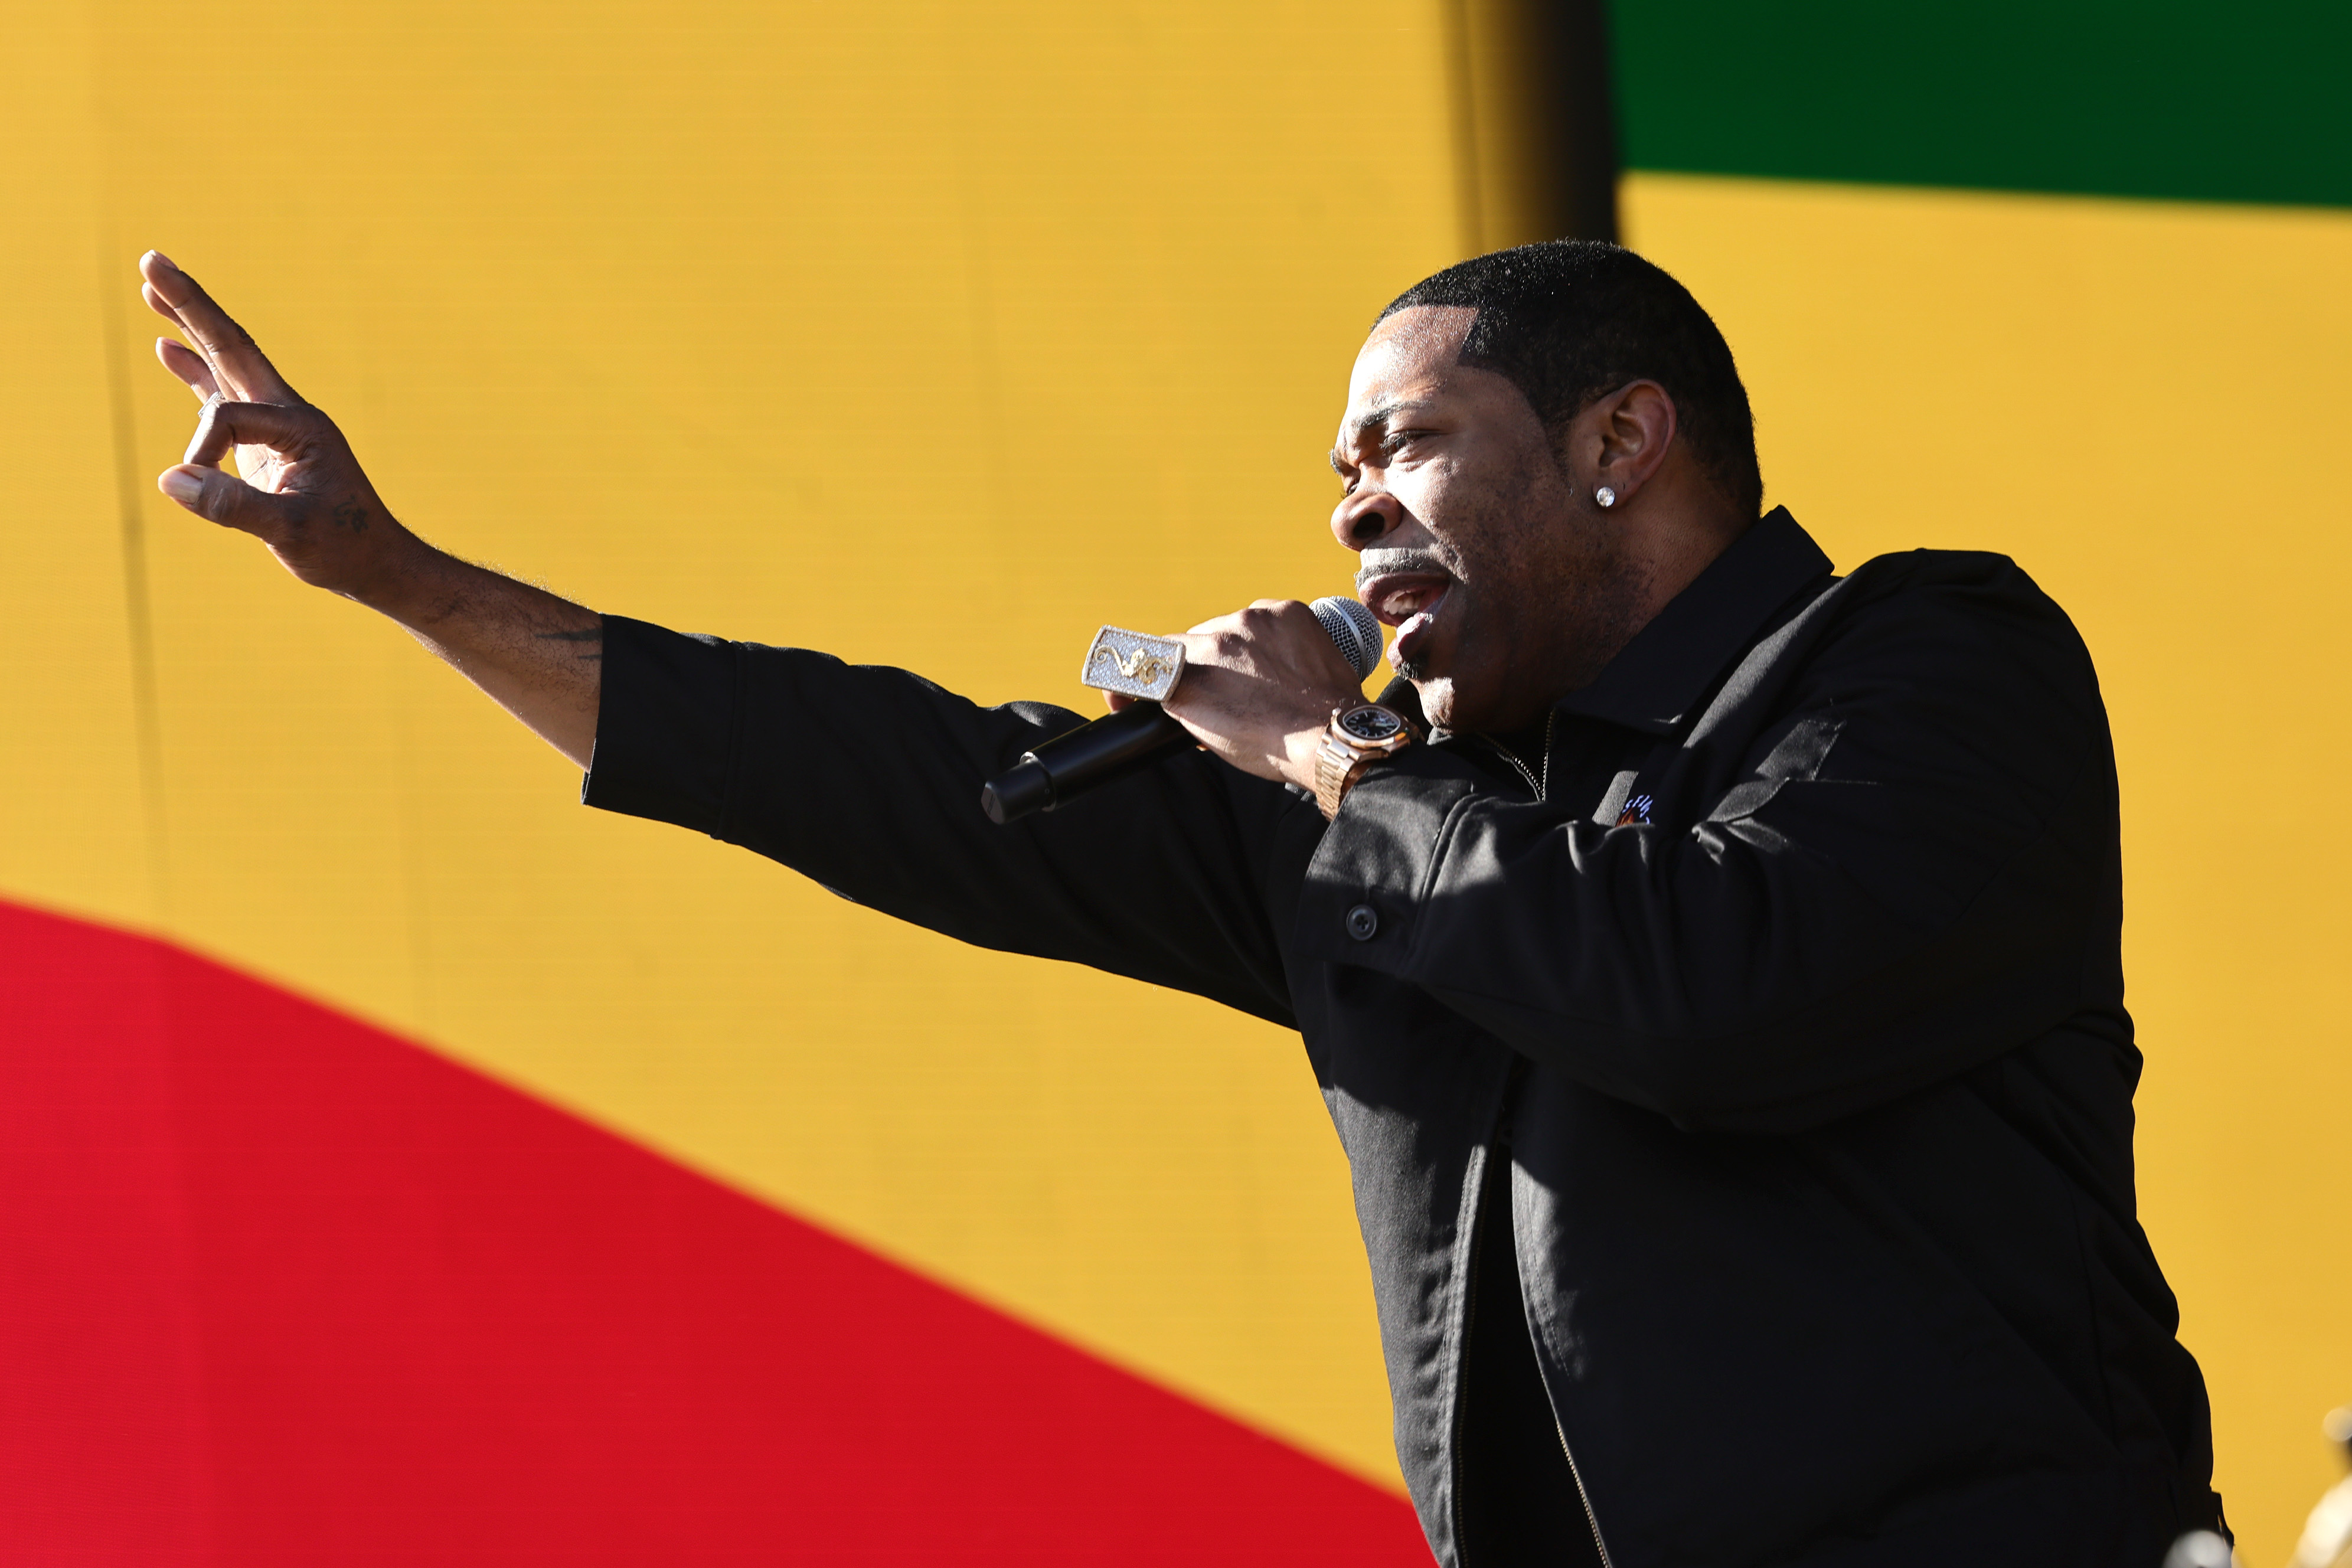 Busta Rhymes performs passionately on stage, holding a microphone and gesturing towards the audience